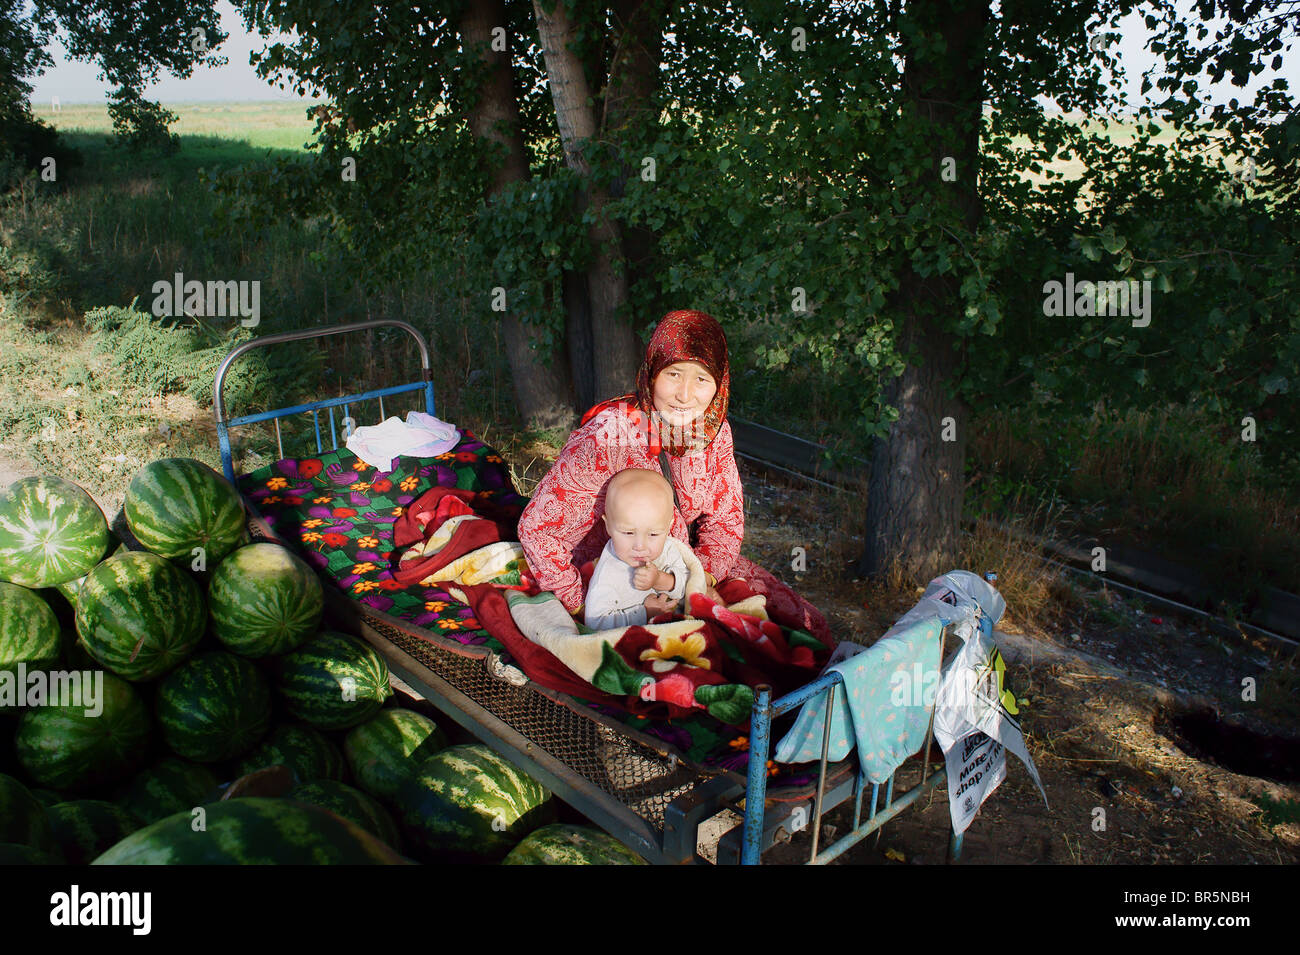 Kyrgyz woman with baby, watermelon seller. Stock Photo